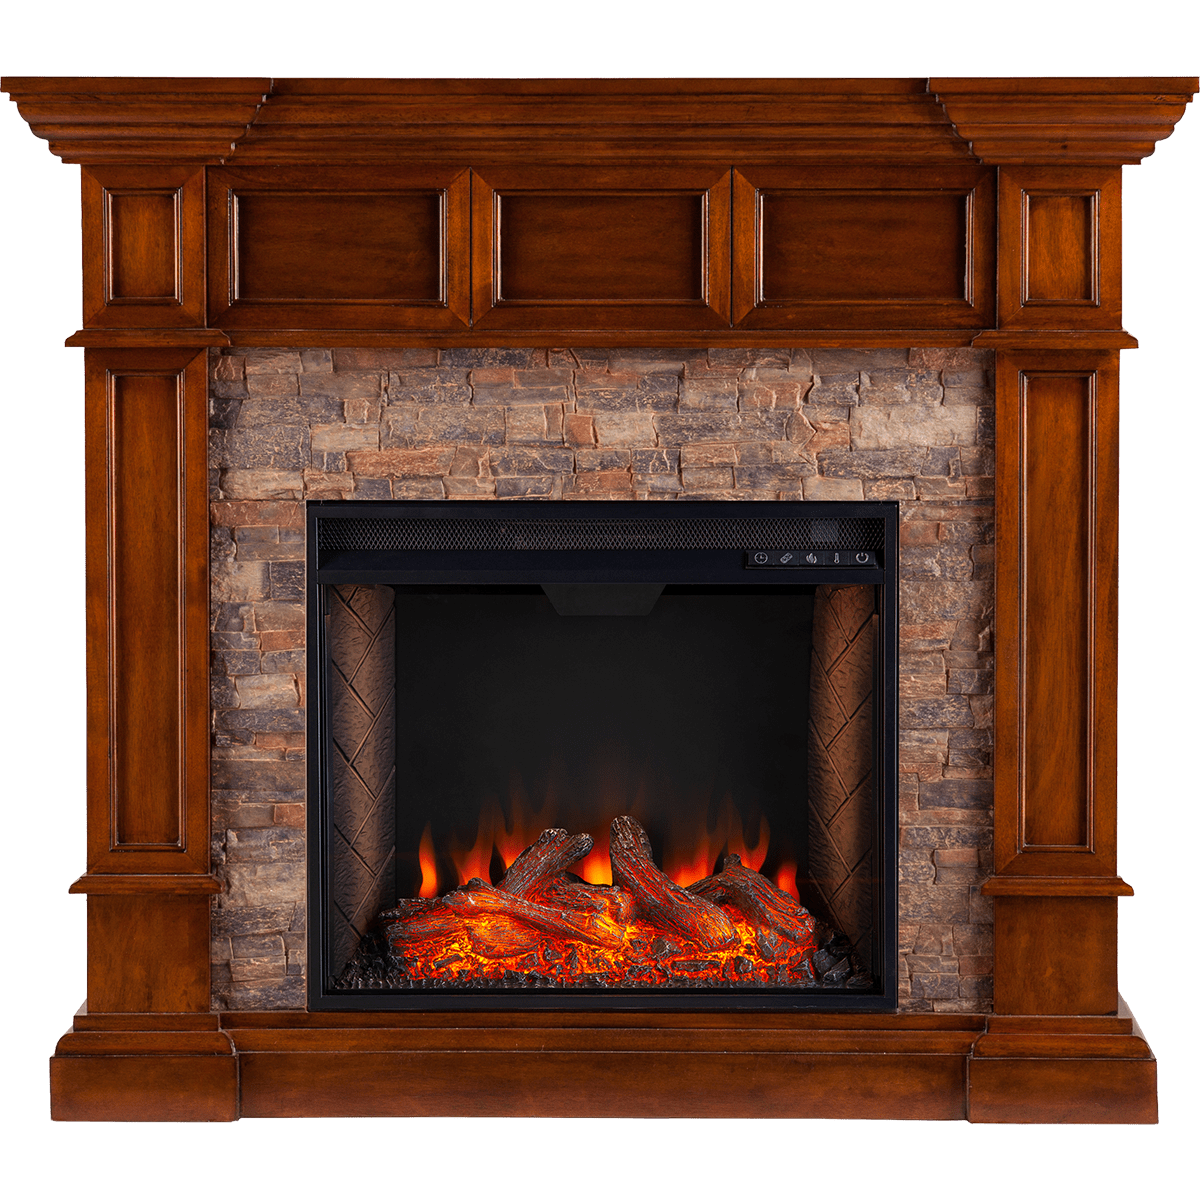 Infrared Fireplace Heater Tv Stand Elegant southern Enterprises Merrimack Simulated Stone Convertible Electric Fireplace